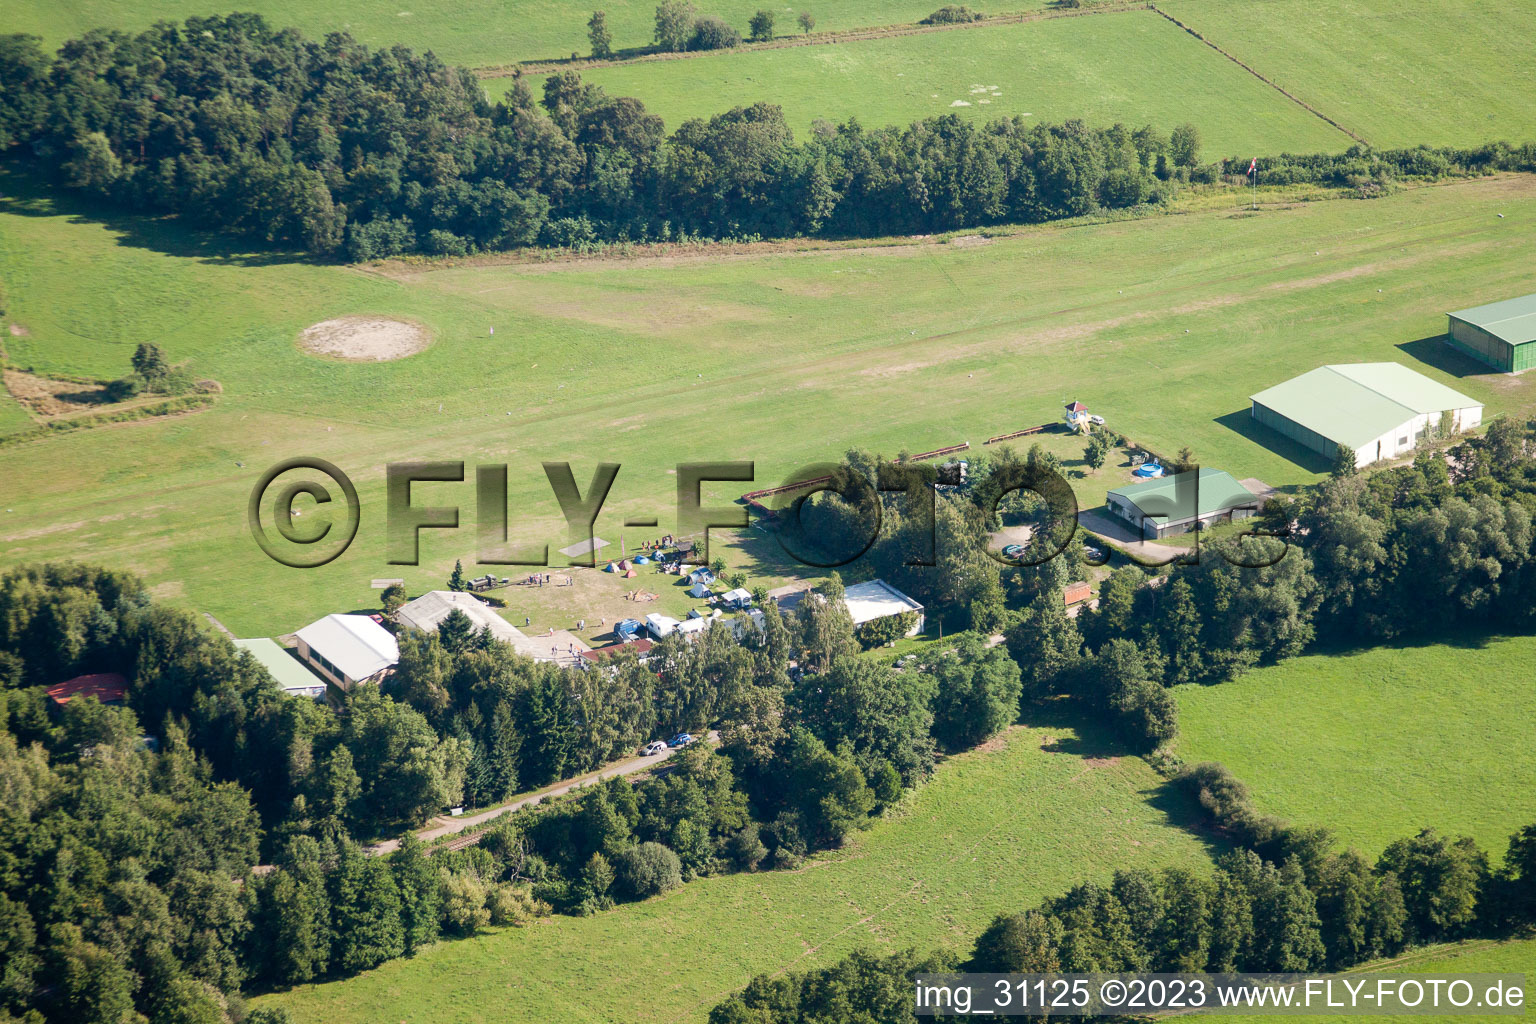 Aerial photograpy of Airfield in Schweighofen in the state Rhineland-Palatinate, Germany